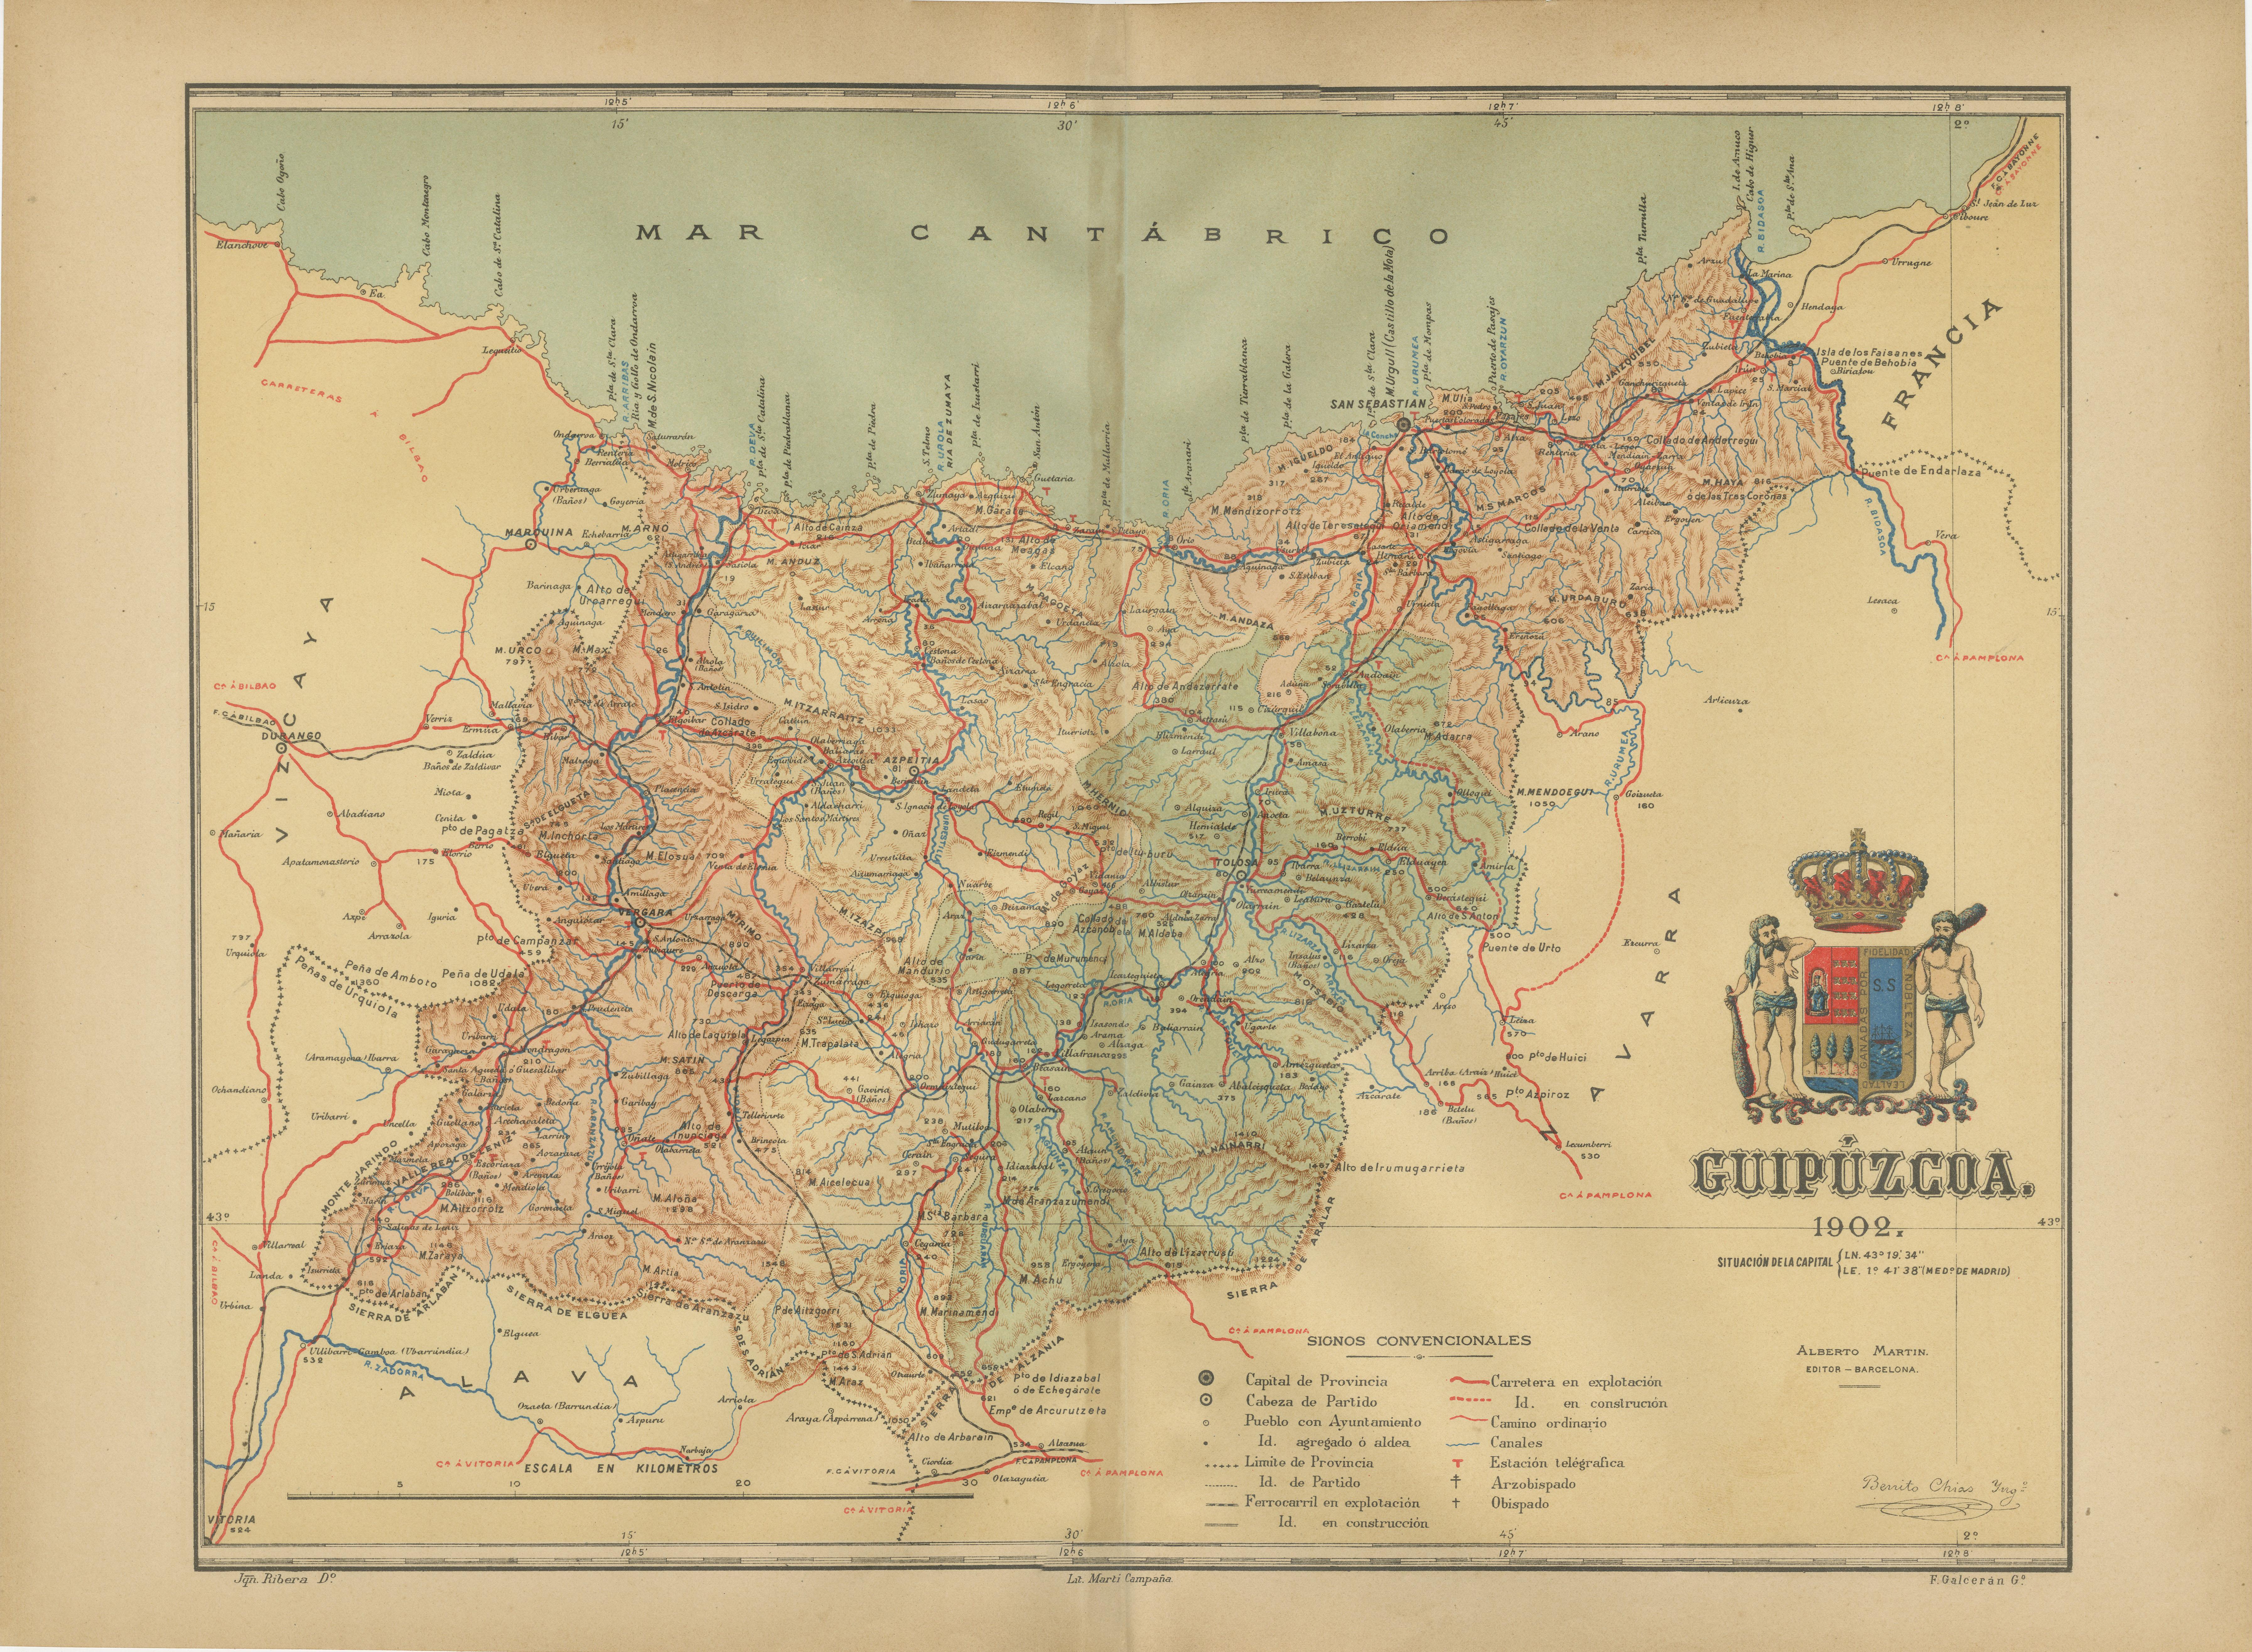 The map showcases the province of Gipuzkoa (also known as Guipúzcoa in Spanish), which is part of the autonomous community of the Basque Country in northern Spain, as of the year 1902. The map includes several notable features:

It depicts the